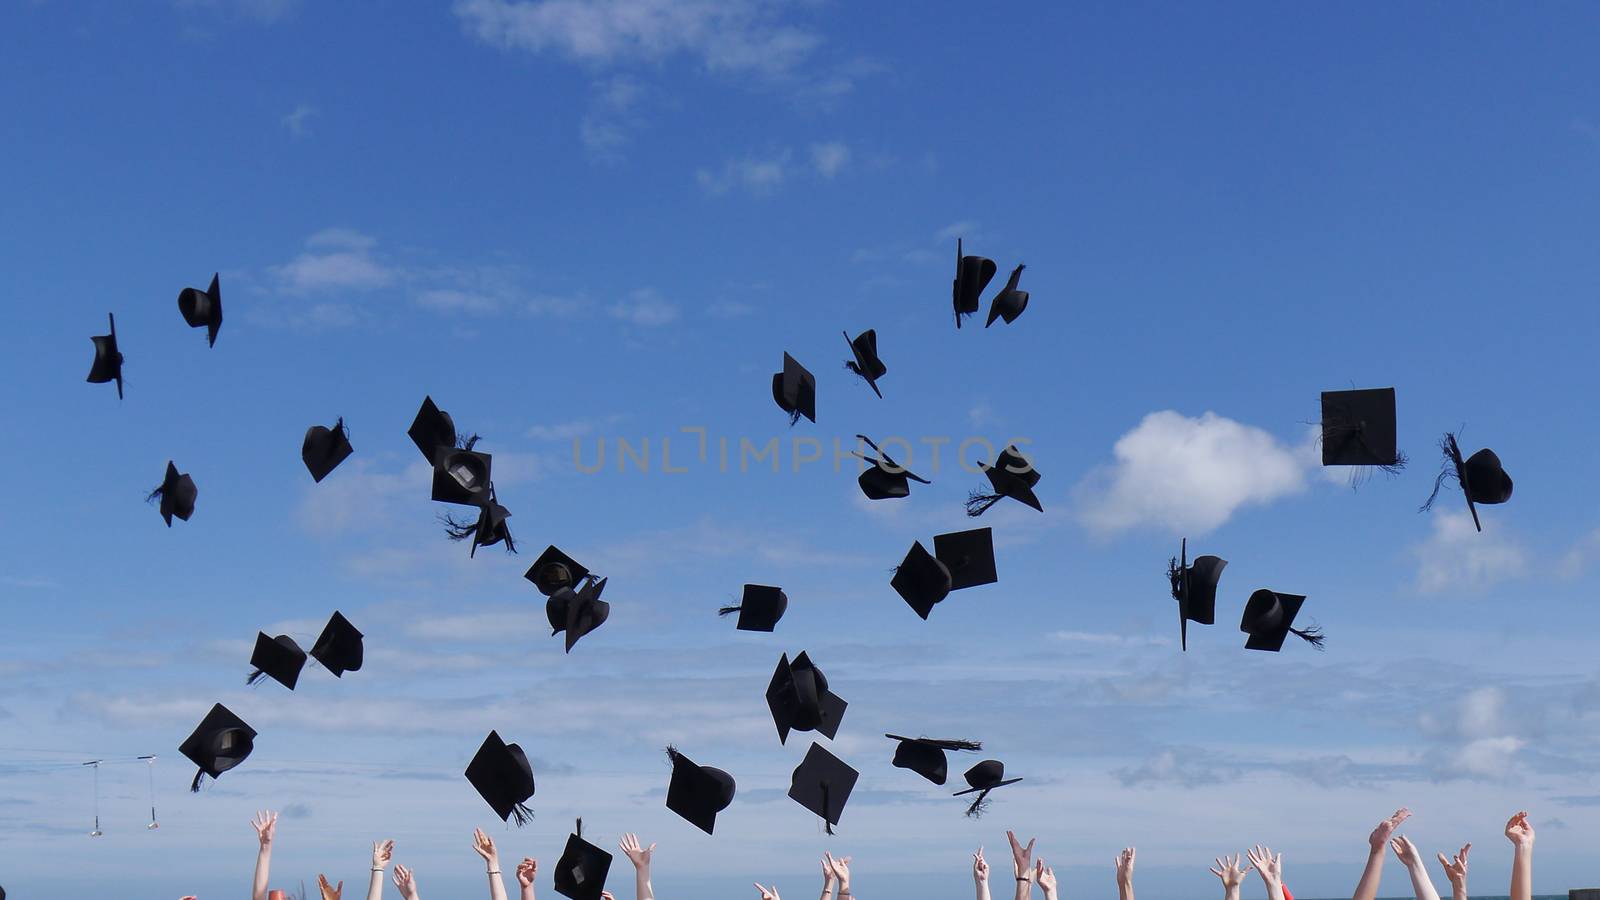 university graduates caps being thrown into the air to celebrate the award of their degrees